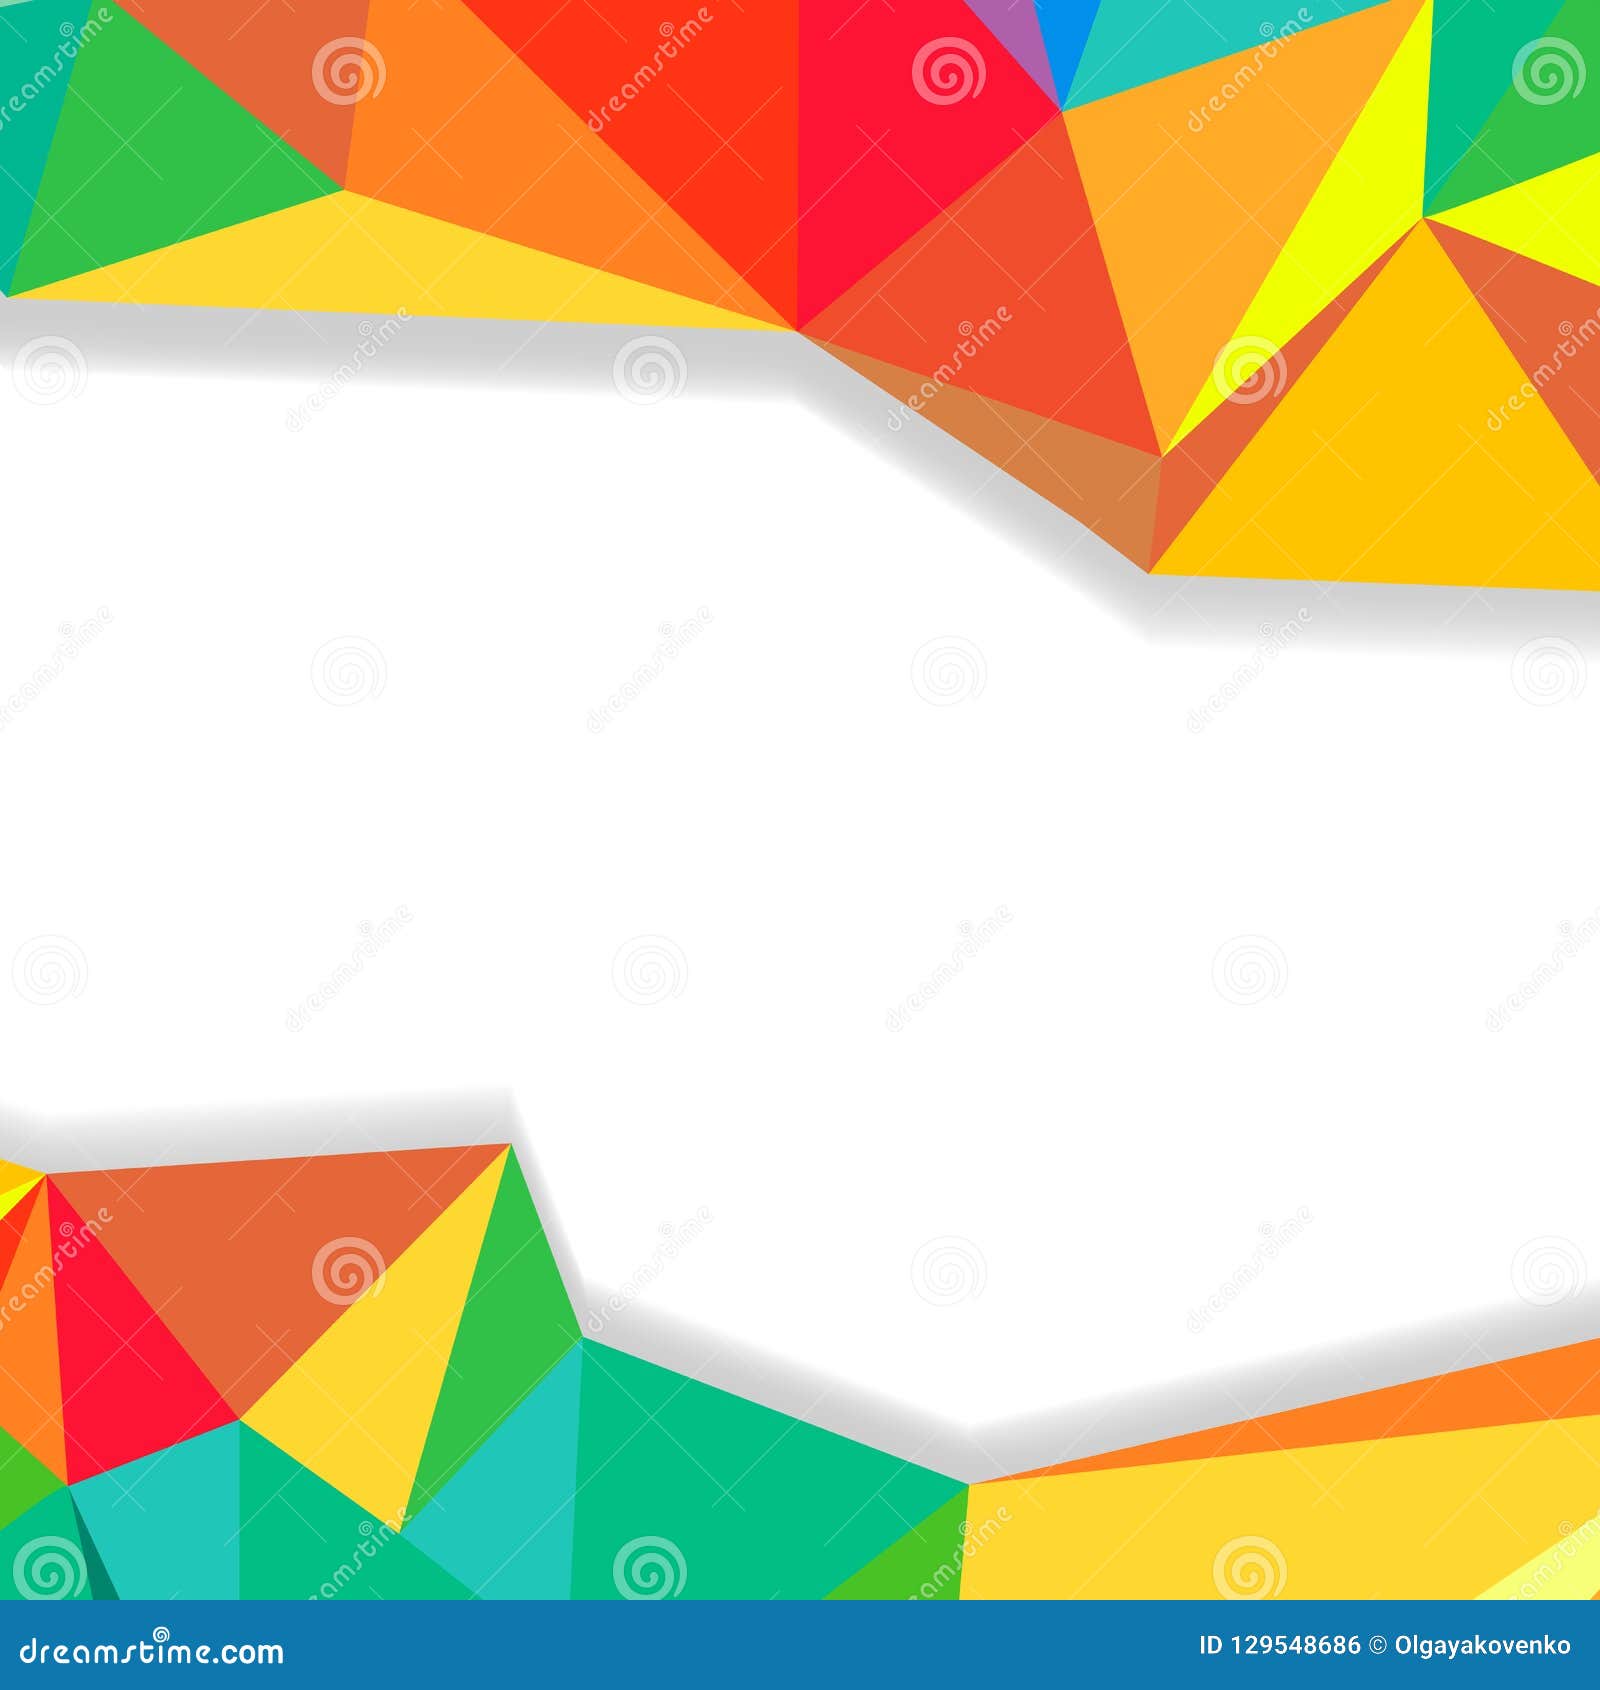 271 Background Abstract Border Design Picture - MyWeb